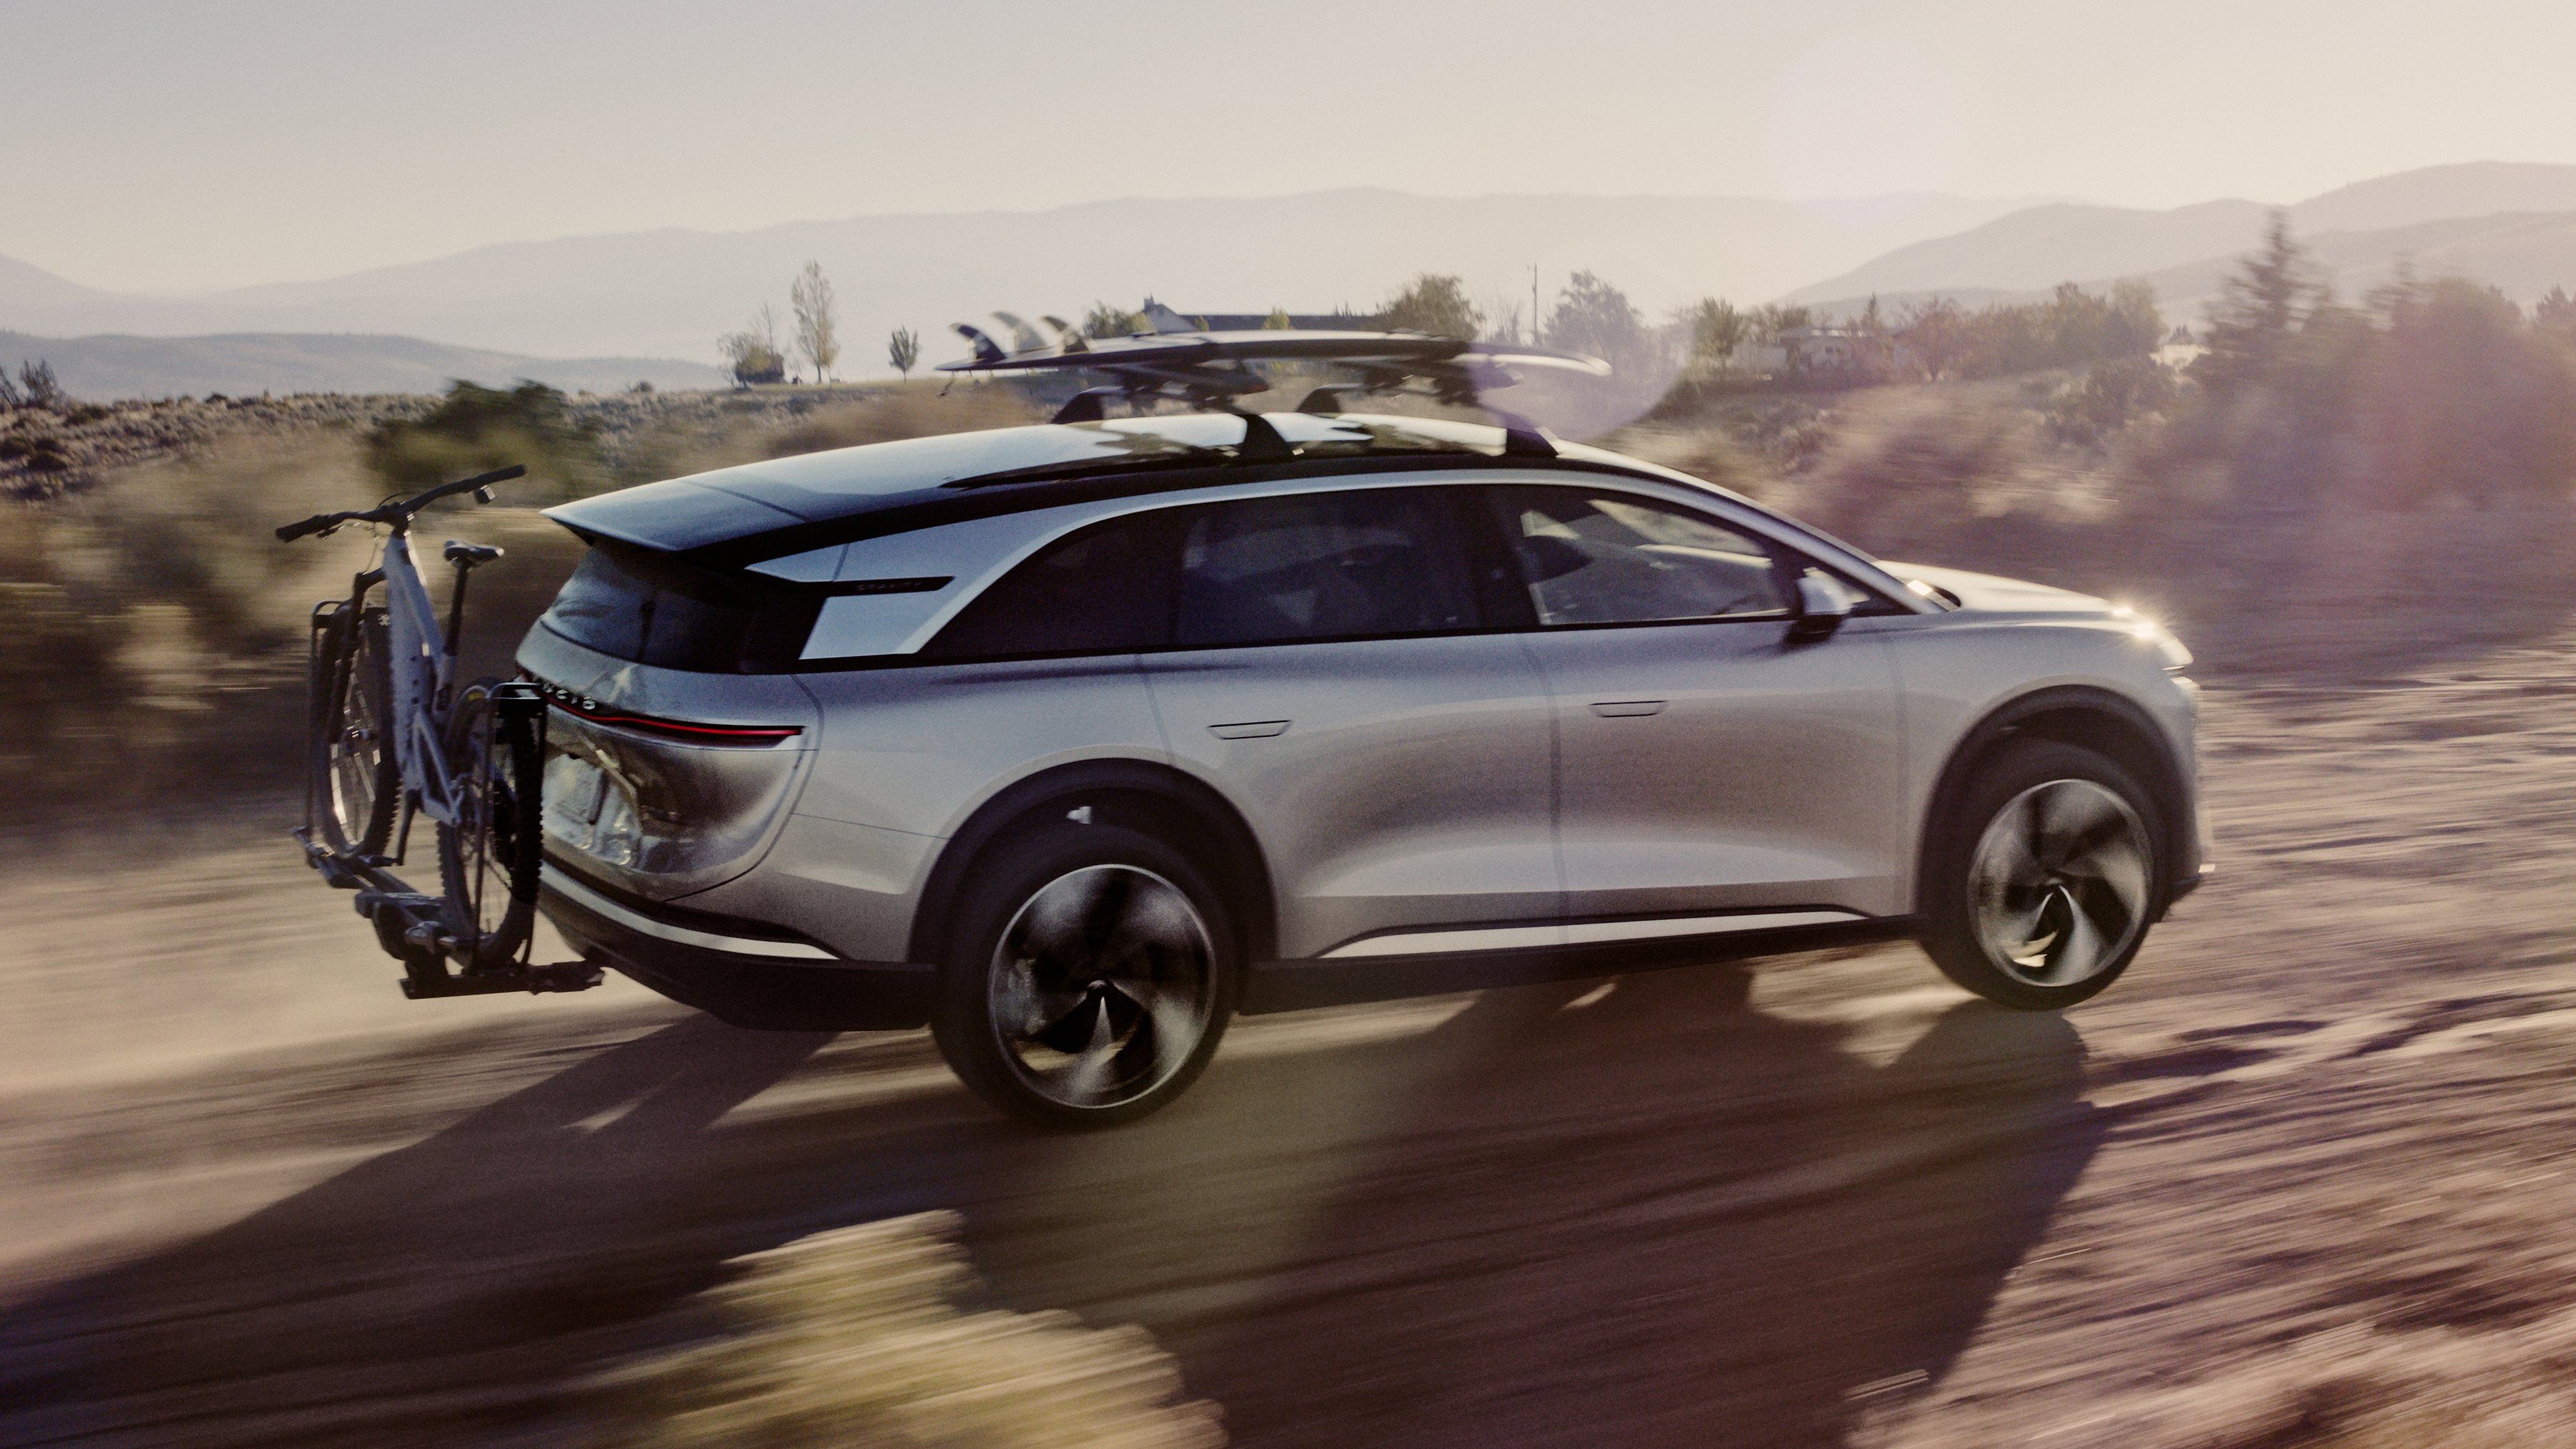 Lucid Gravity electric SUV unveiled with 440-mile range